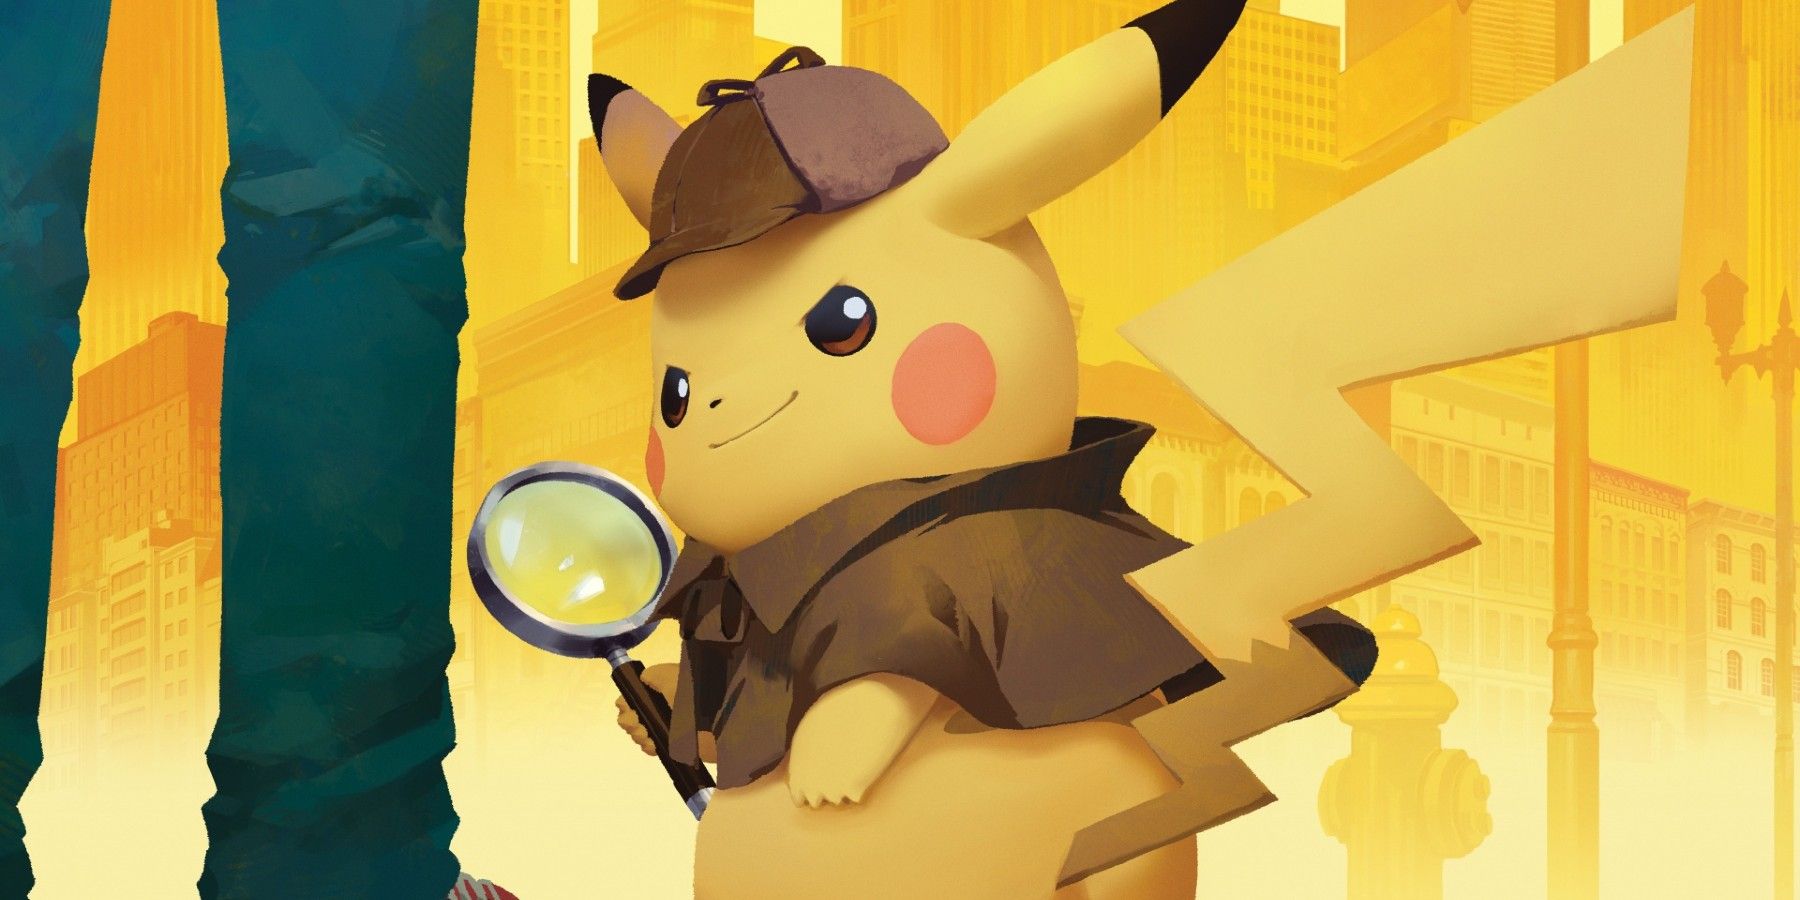 detective pikachu game cover art